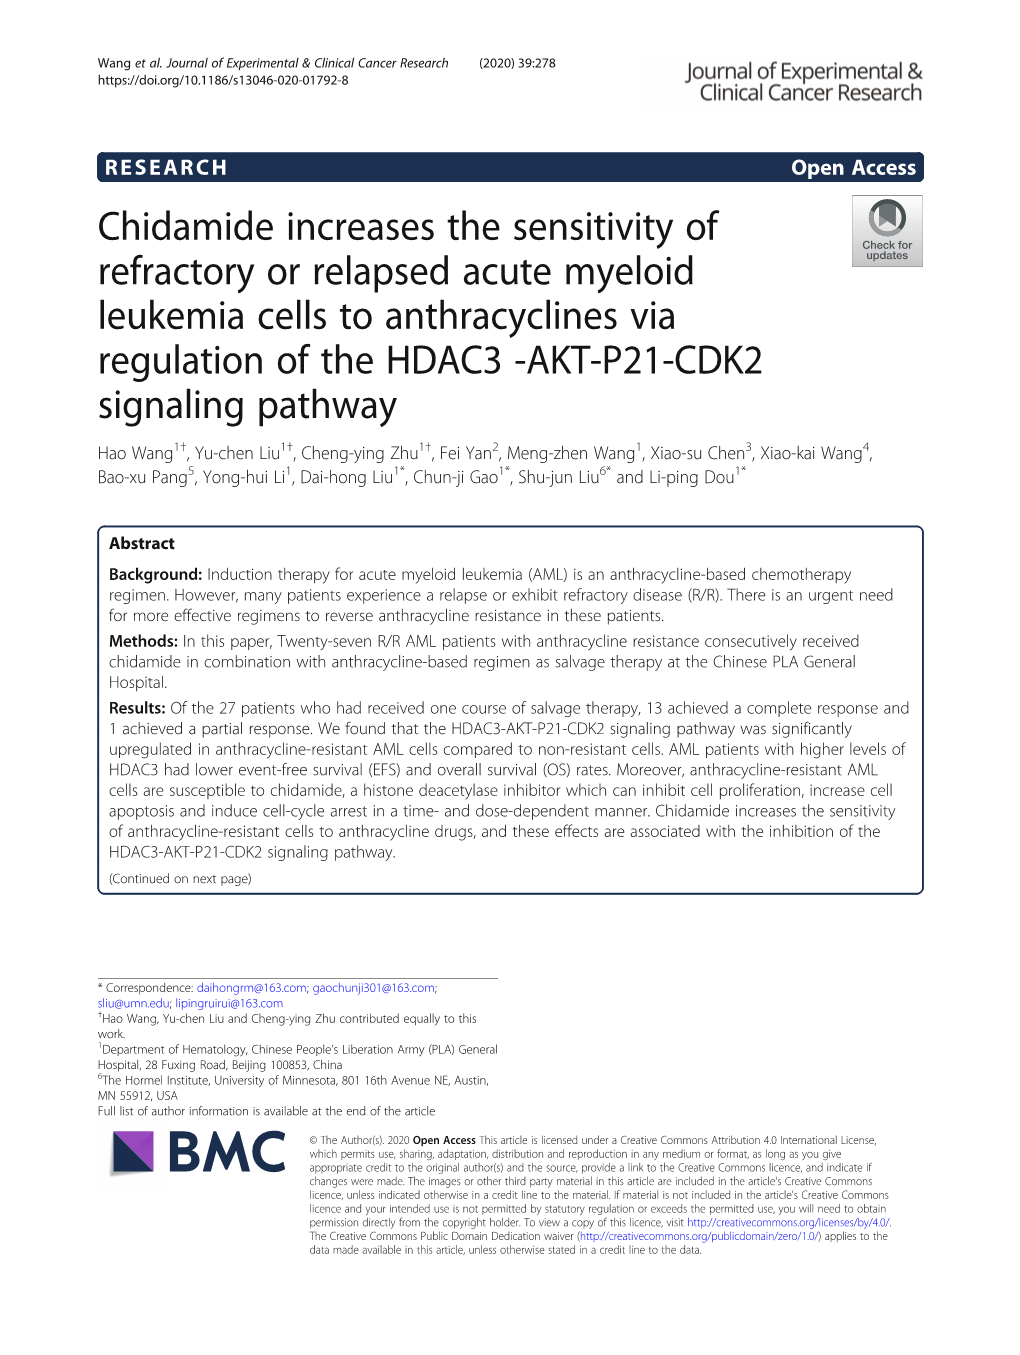 Chidamide Increases the Sensitivity of Refractory Or Relapsed Acute Myeloid